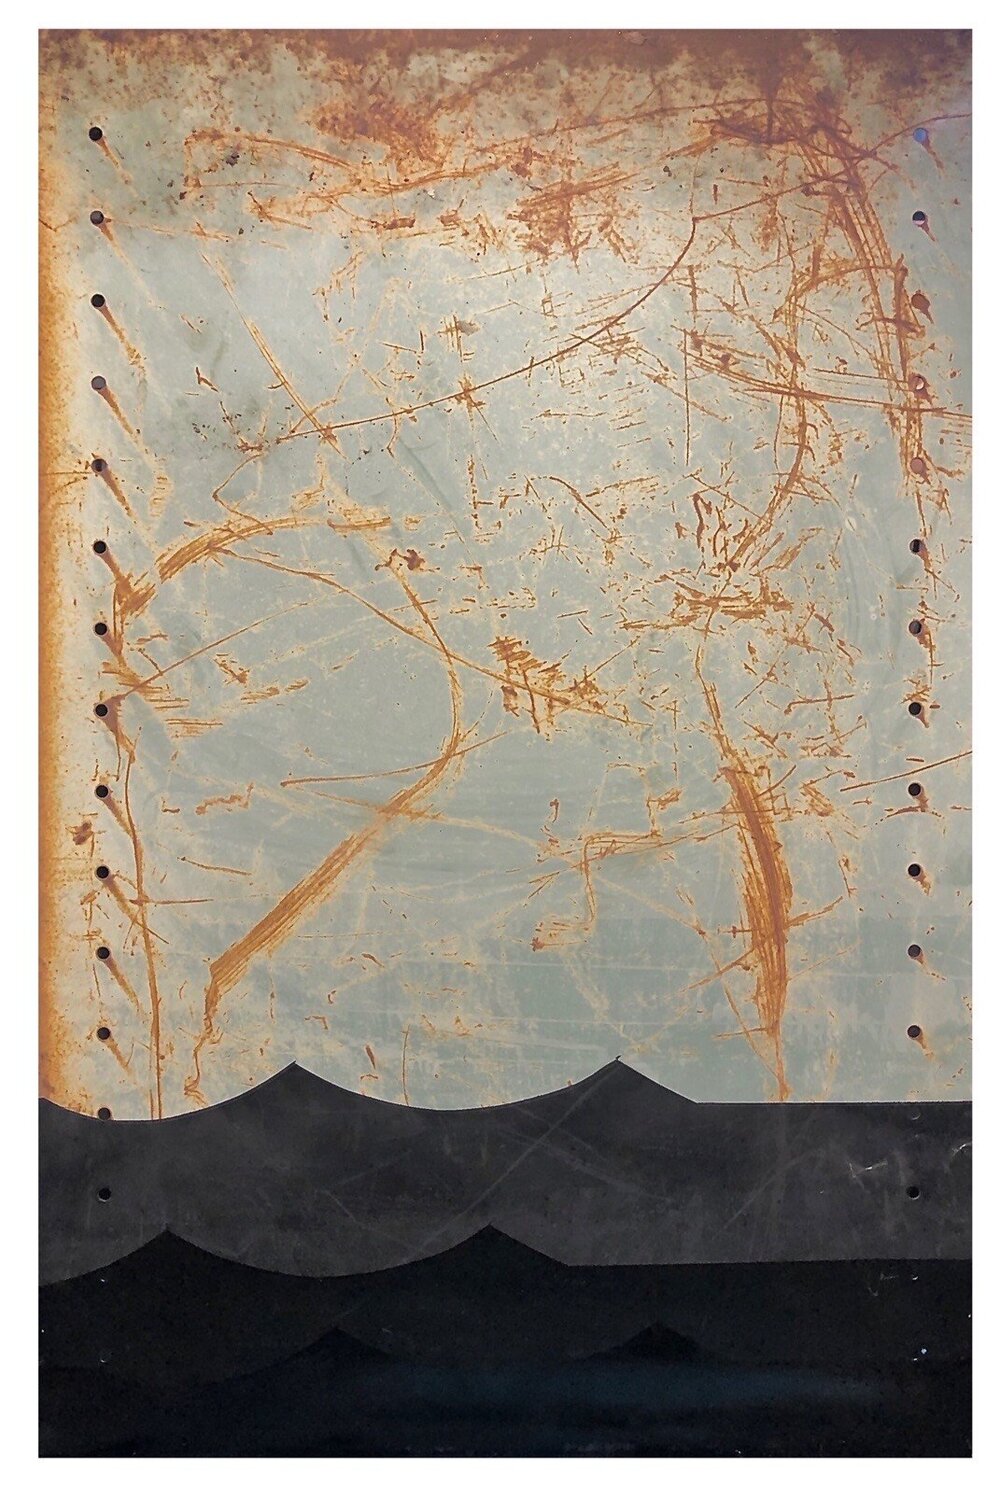 Mike Black - The LocksInk, latex, spray paint, on aged metal panel24 x 36 in.$8,000